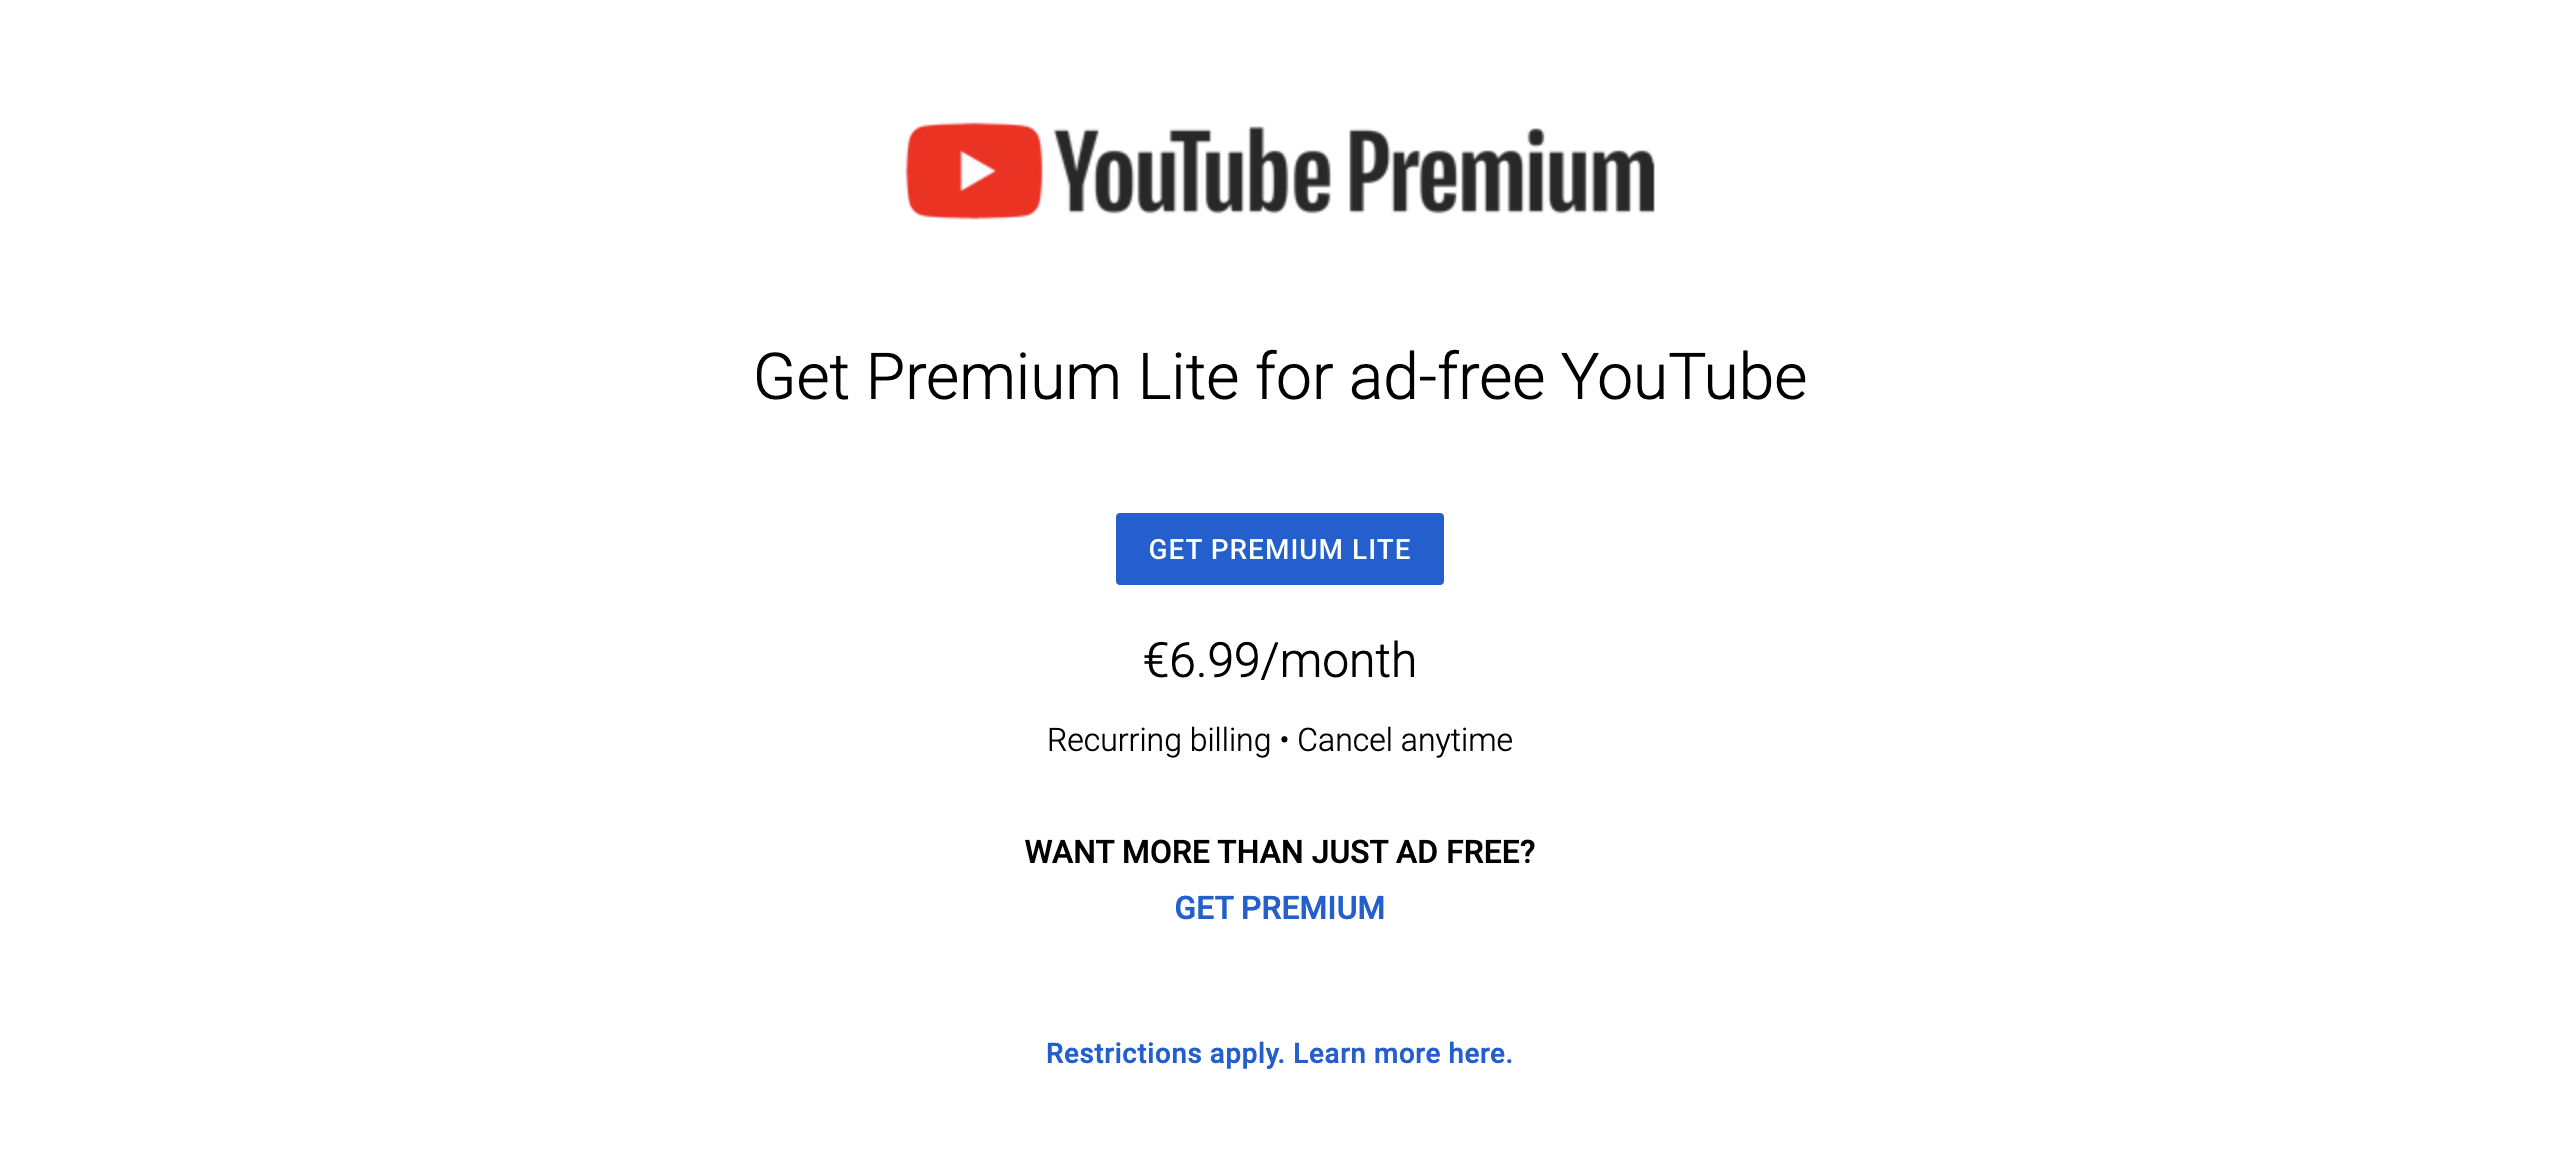 YouTube discontinues Premium Lite, angering subscribers